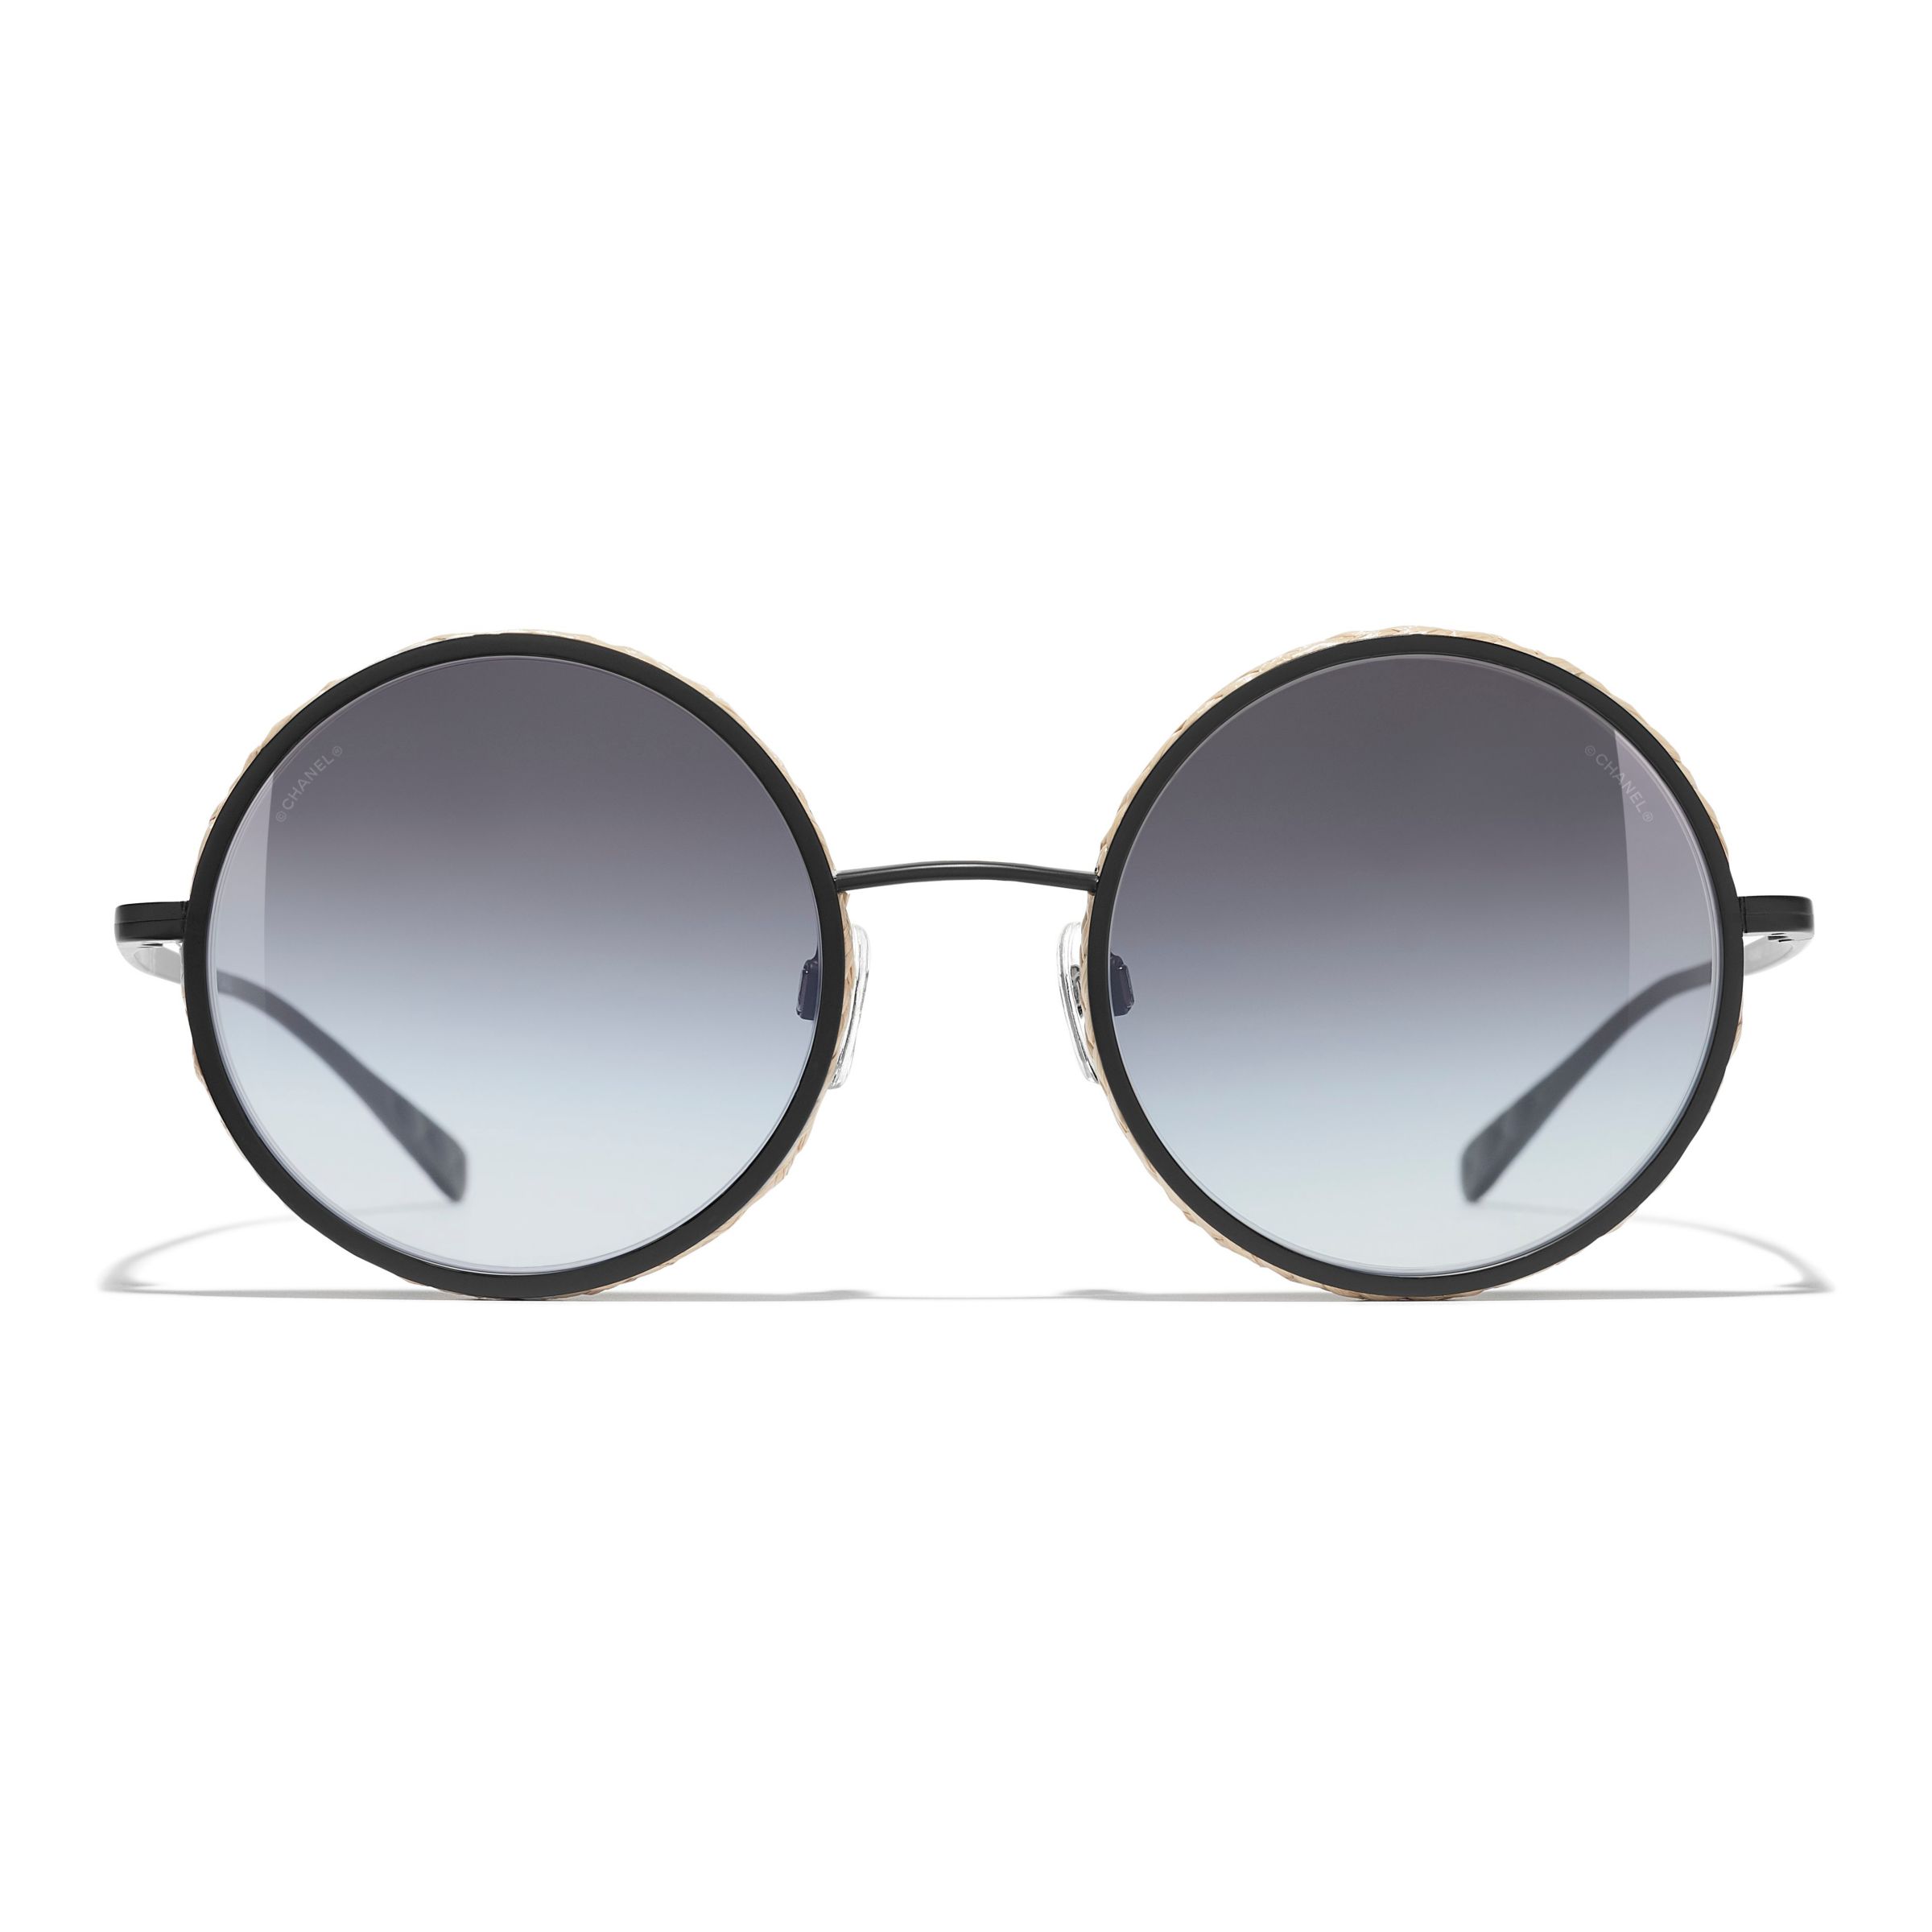 CHANEL Round Sunglasses CH4250 Black/Grey Gradient at John Lewis & Partners